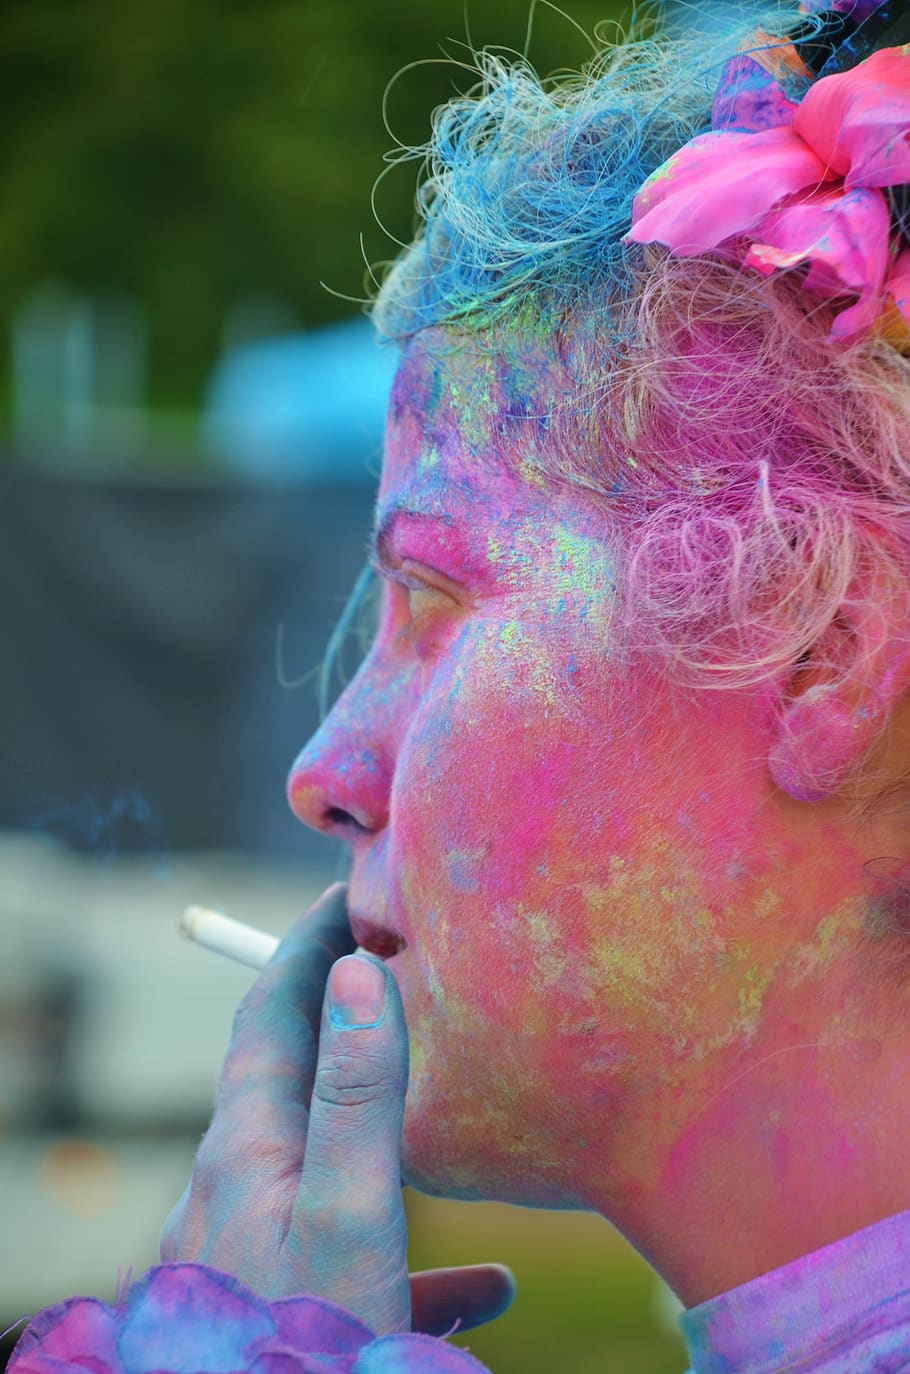 girl, colorful, smoking, relaxed, funny, celebration, smoke, happy, party, festival